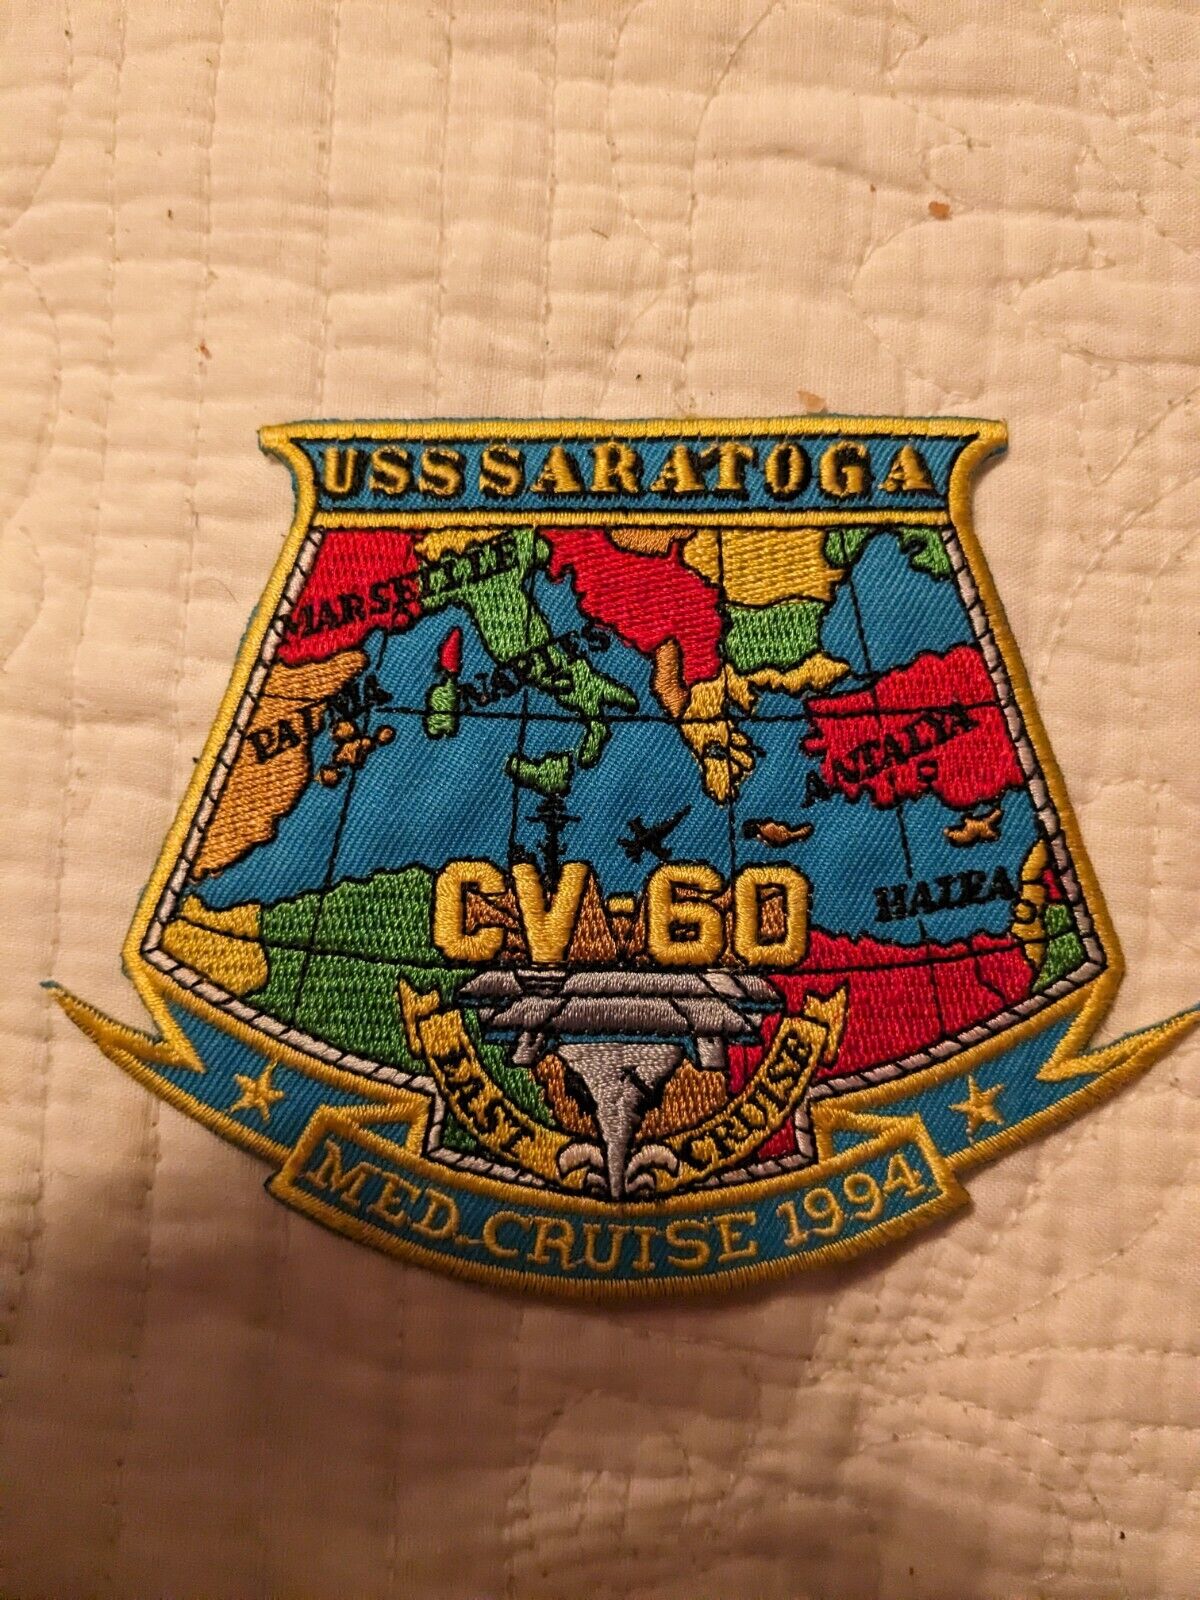 U.S.S. Saratoga Med Cruise 1994 Embroidered Patch